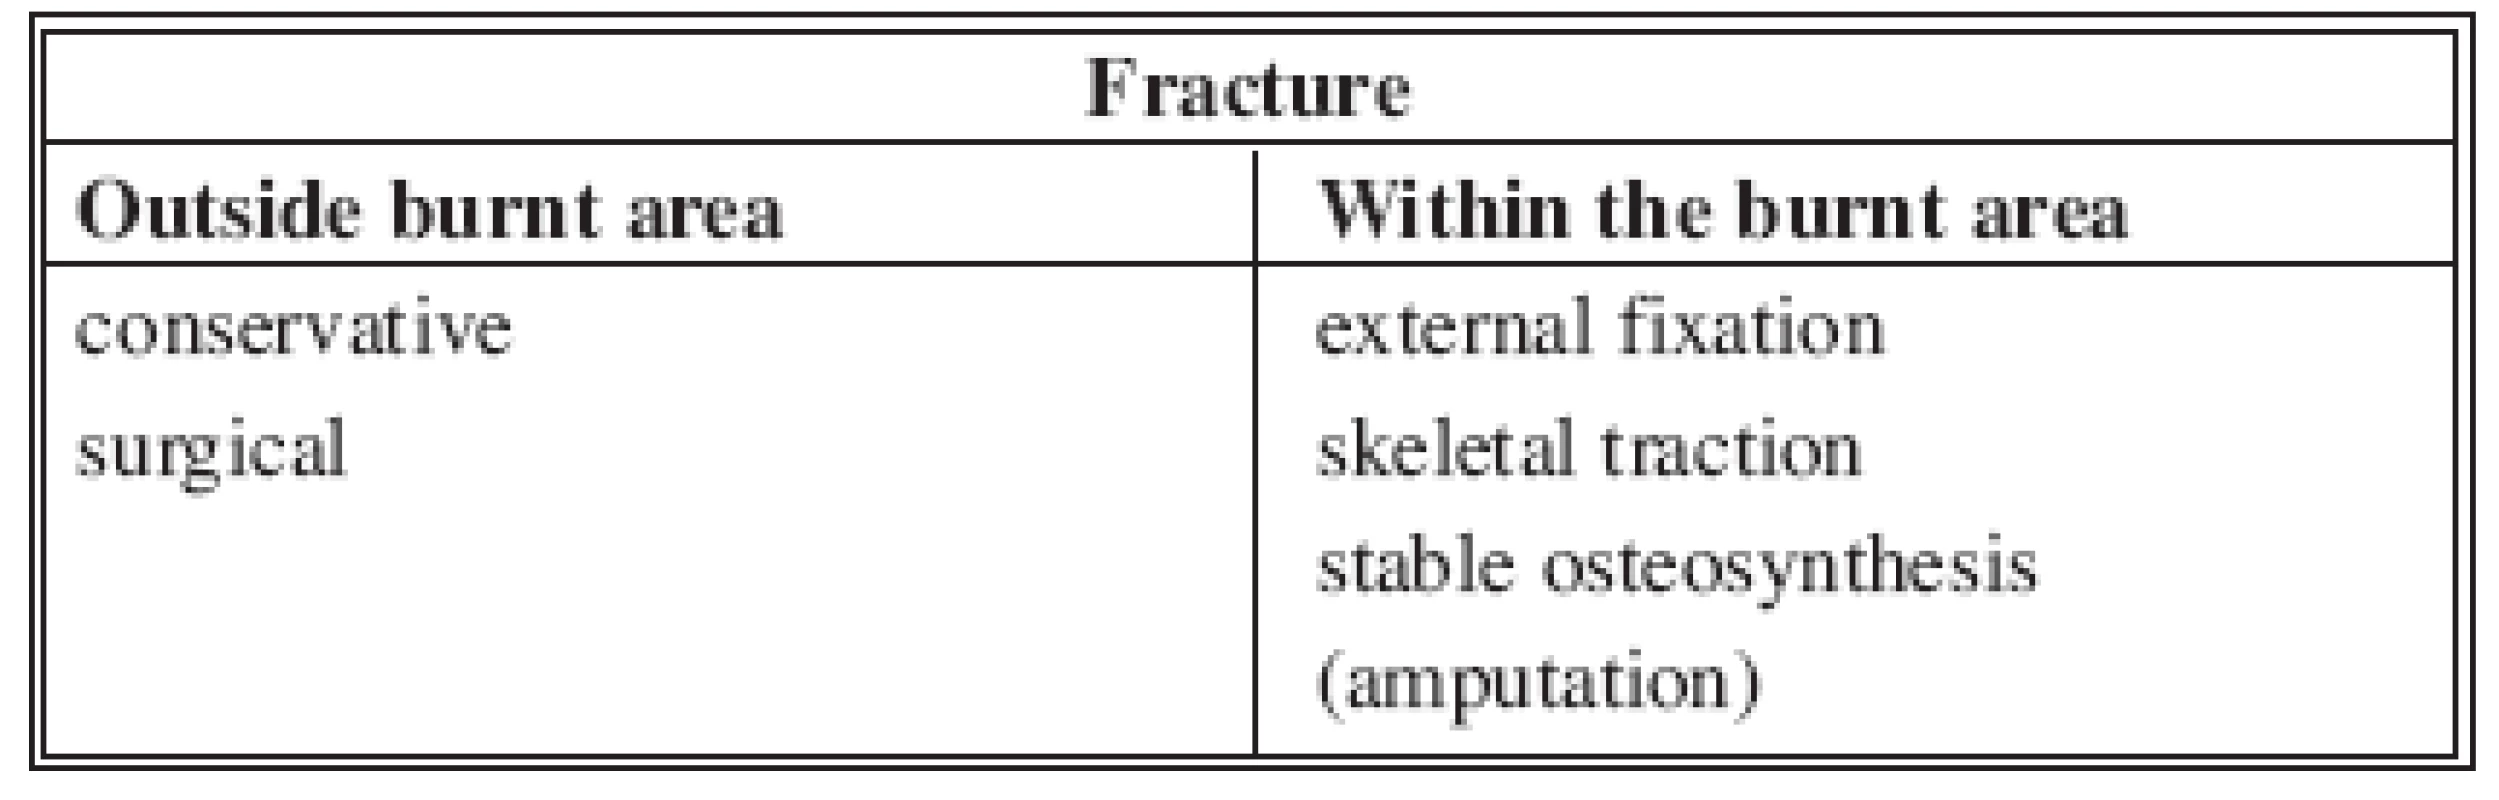 Treatment options of fractures in combination with burns